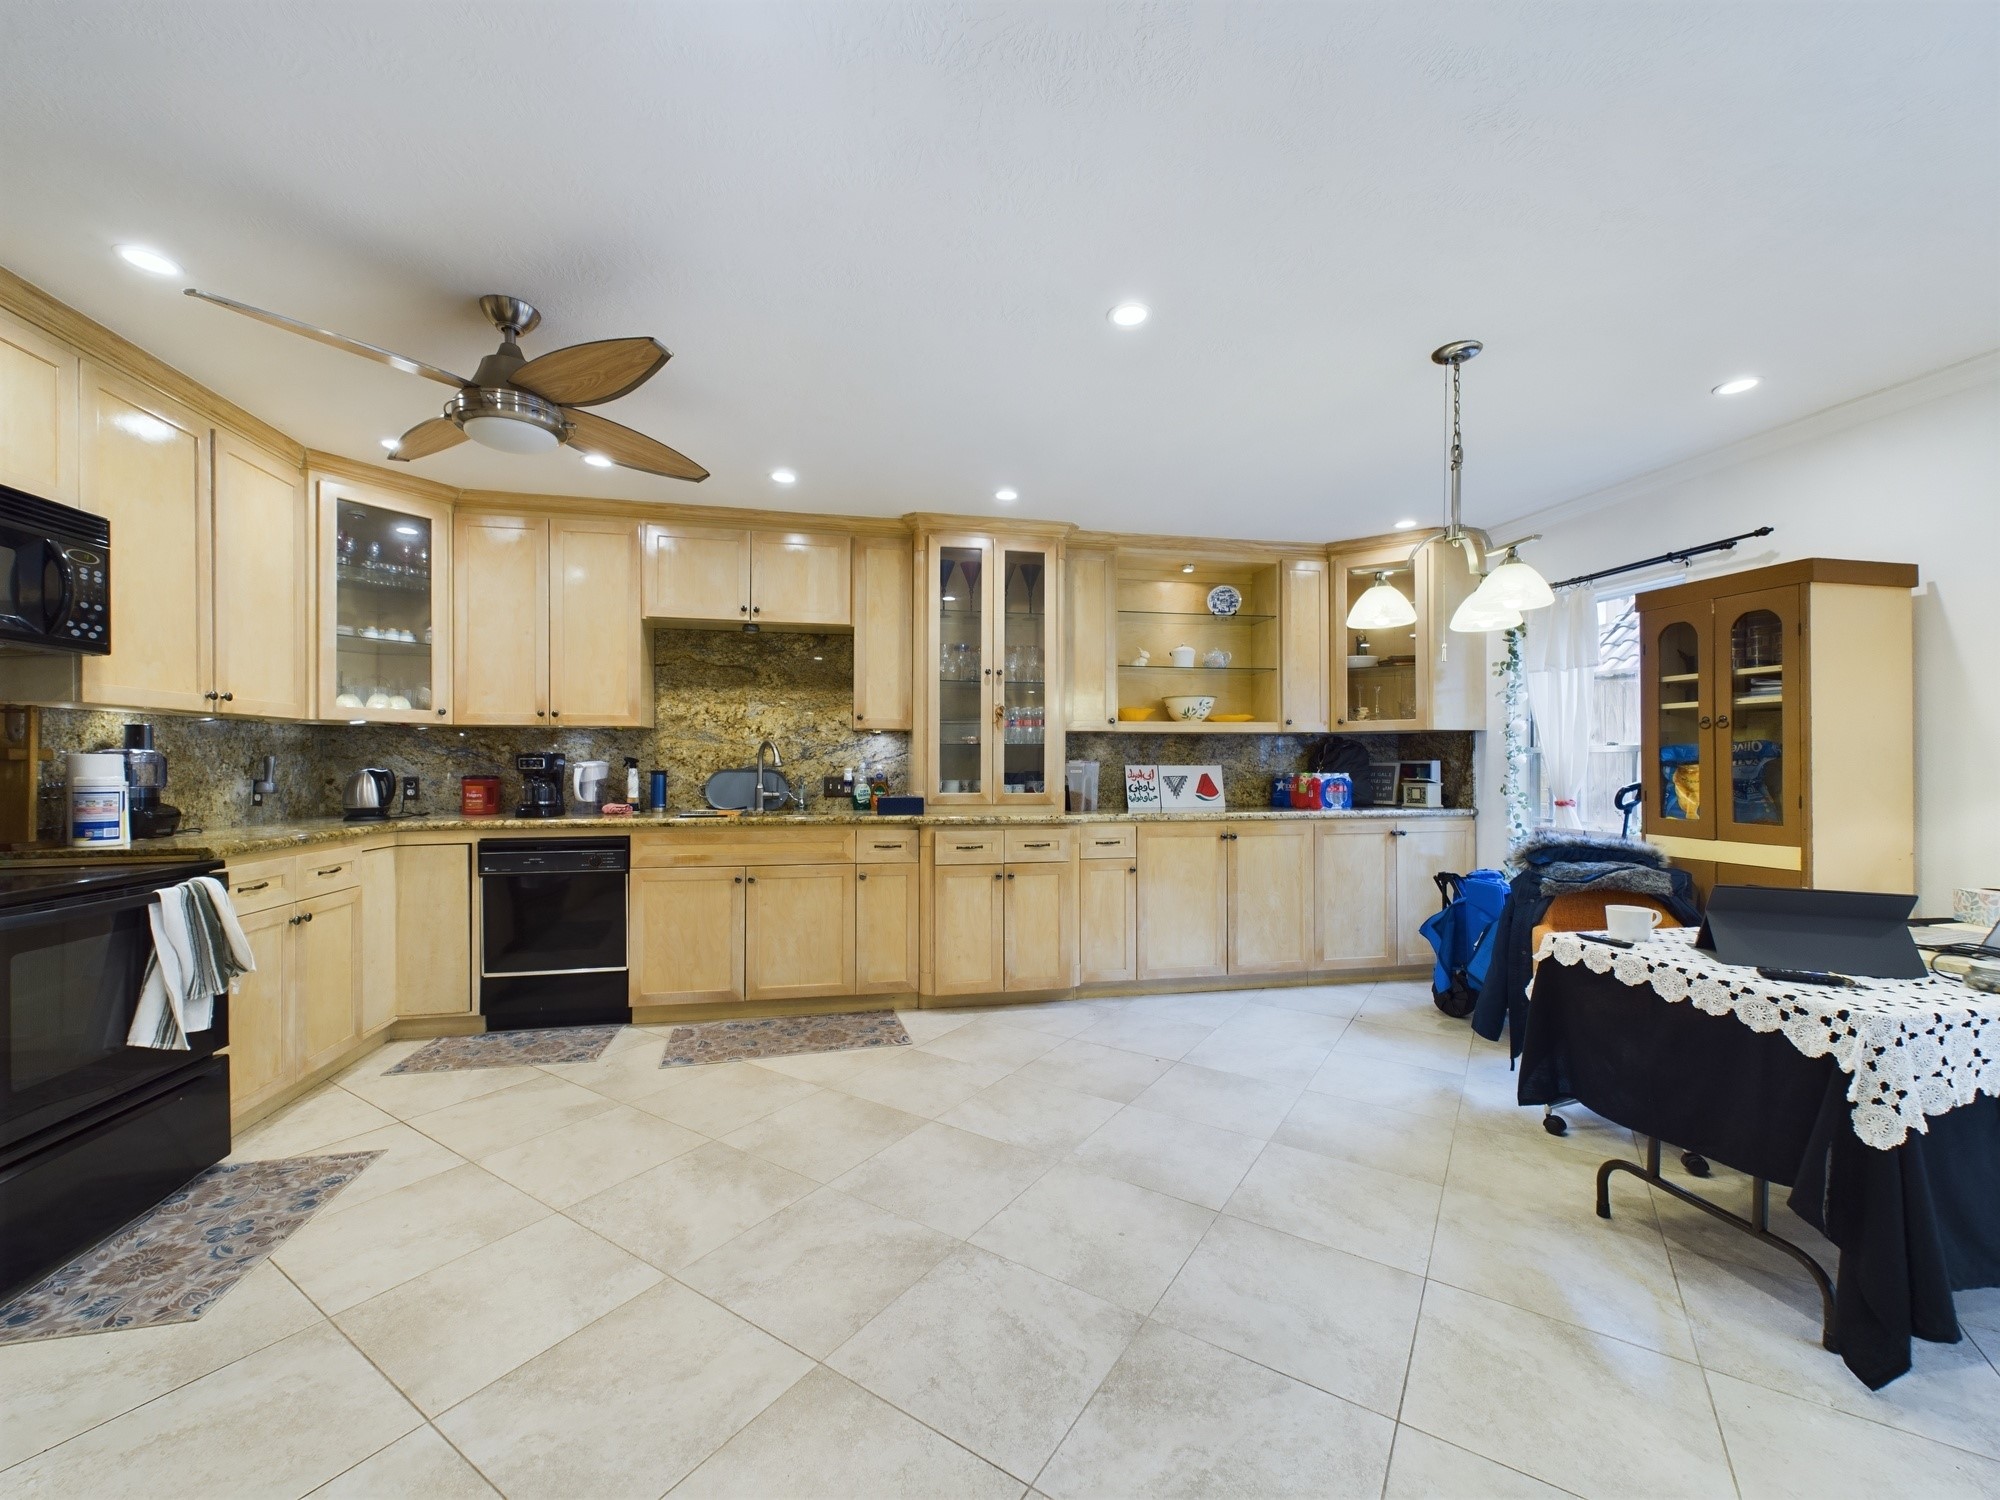 Spectacular Eat-in Kitchen!  Tons of Cabinets, Glass Front Doors & Matching Granite Countertops and Granite Backsplash